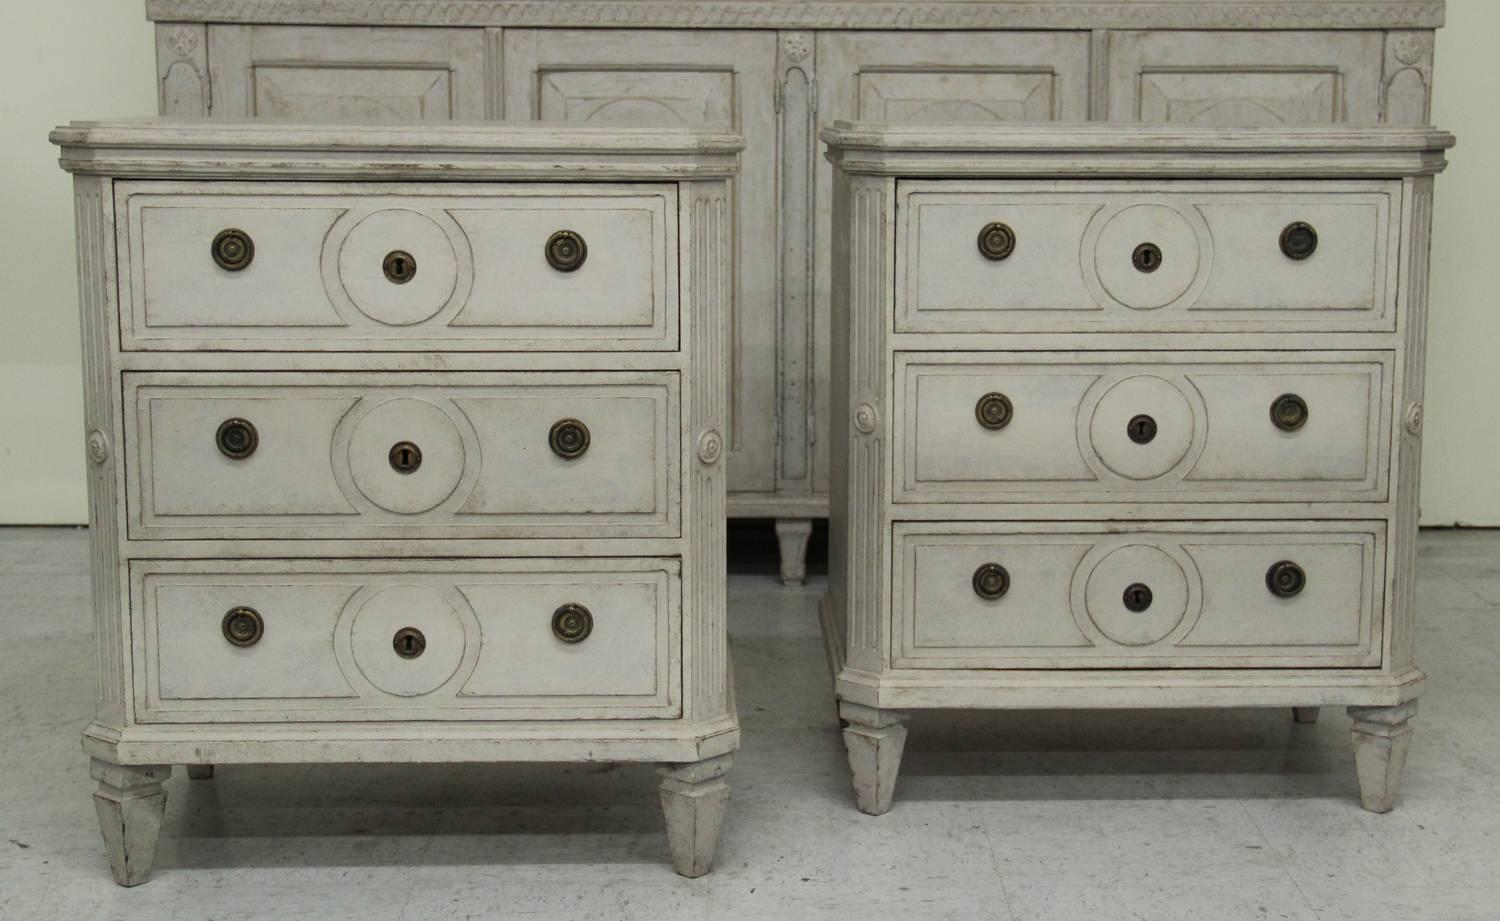 A beautiful pair of Swedish painted chests in the Gustavian style with canted and fluted corner posts and square tapered legs. Each chest has three drawers and brass hardware.